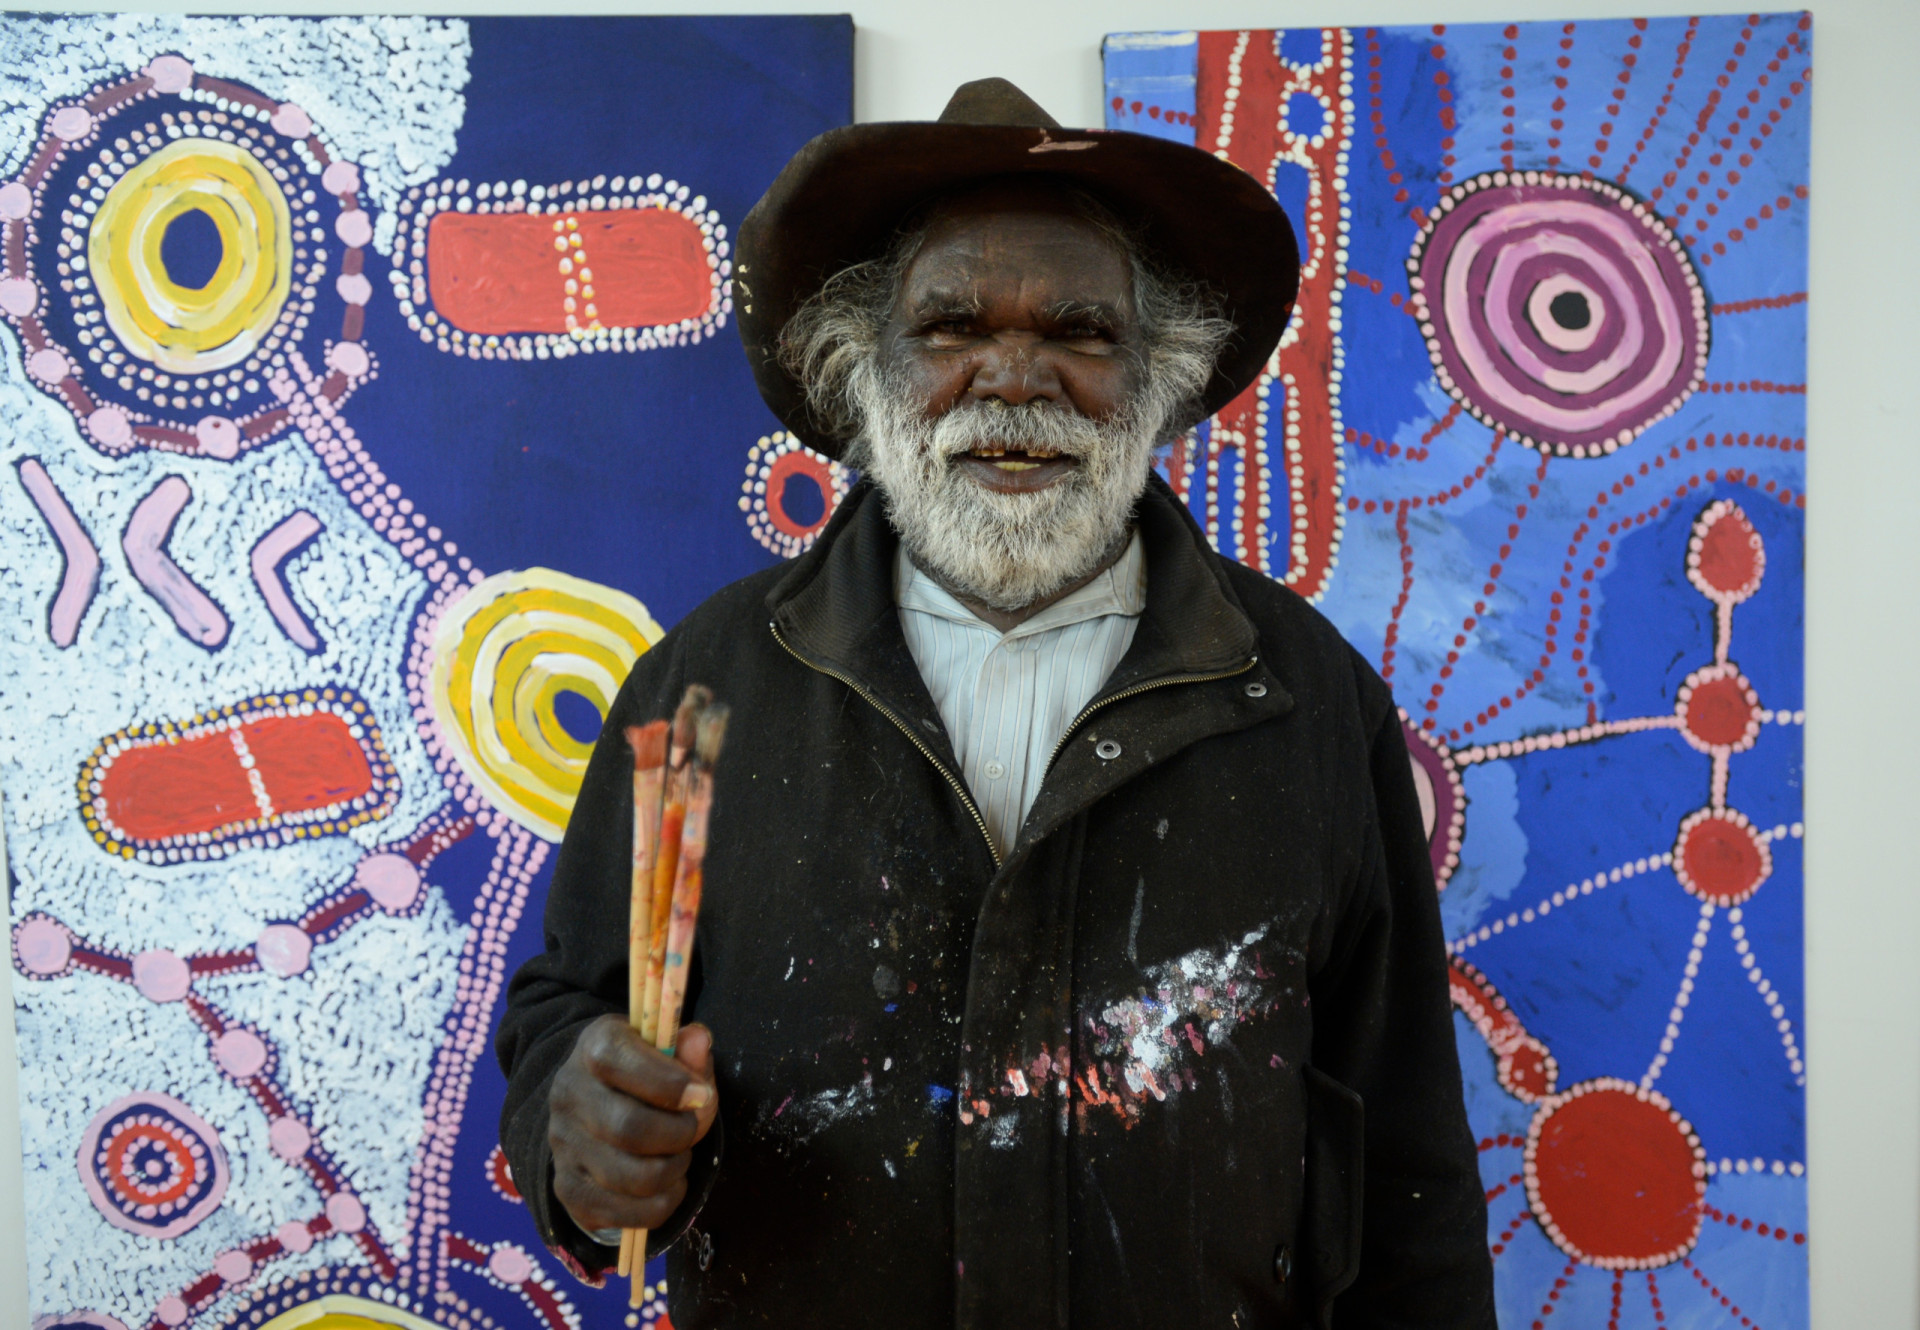 <p>In Aboriginal and Torres Strait Islander culture, Elders hold respected positions in communities, serving as custodians of Indigenous knowledge and culture.</p><p><a href="https://www.msn.com/en-us/community/channel/vid-7xx8mnucu55yw63we9va2gwr7uihbxwc68fxqp25x6tg4ftibpra?cvid=94631541bc0f4f89bfd59158d696ad7e">Follow us and access great exclusive content every day</a></p>